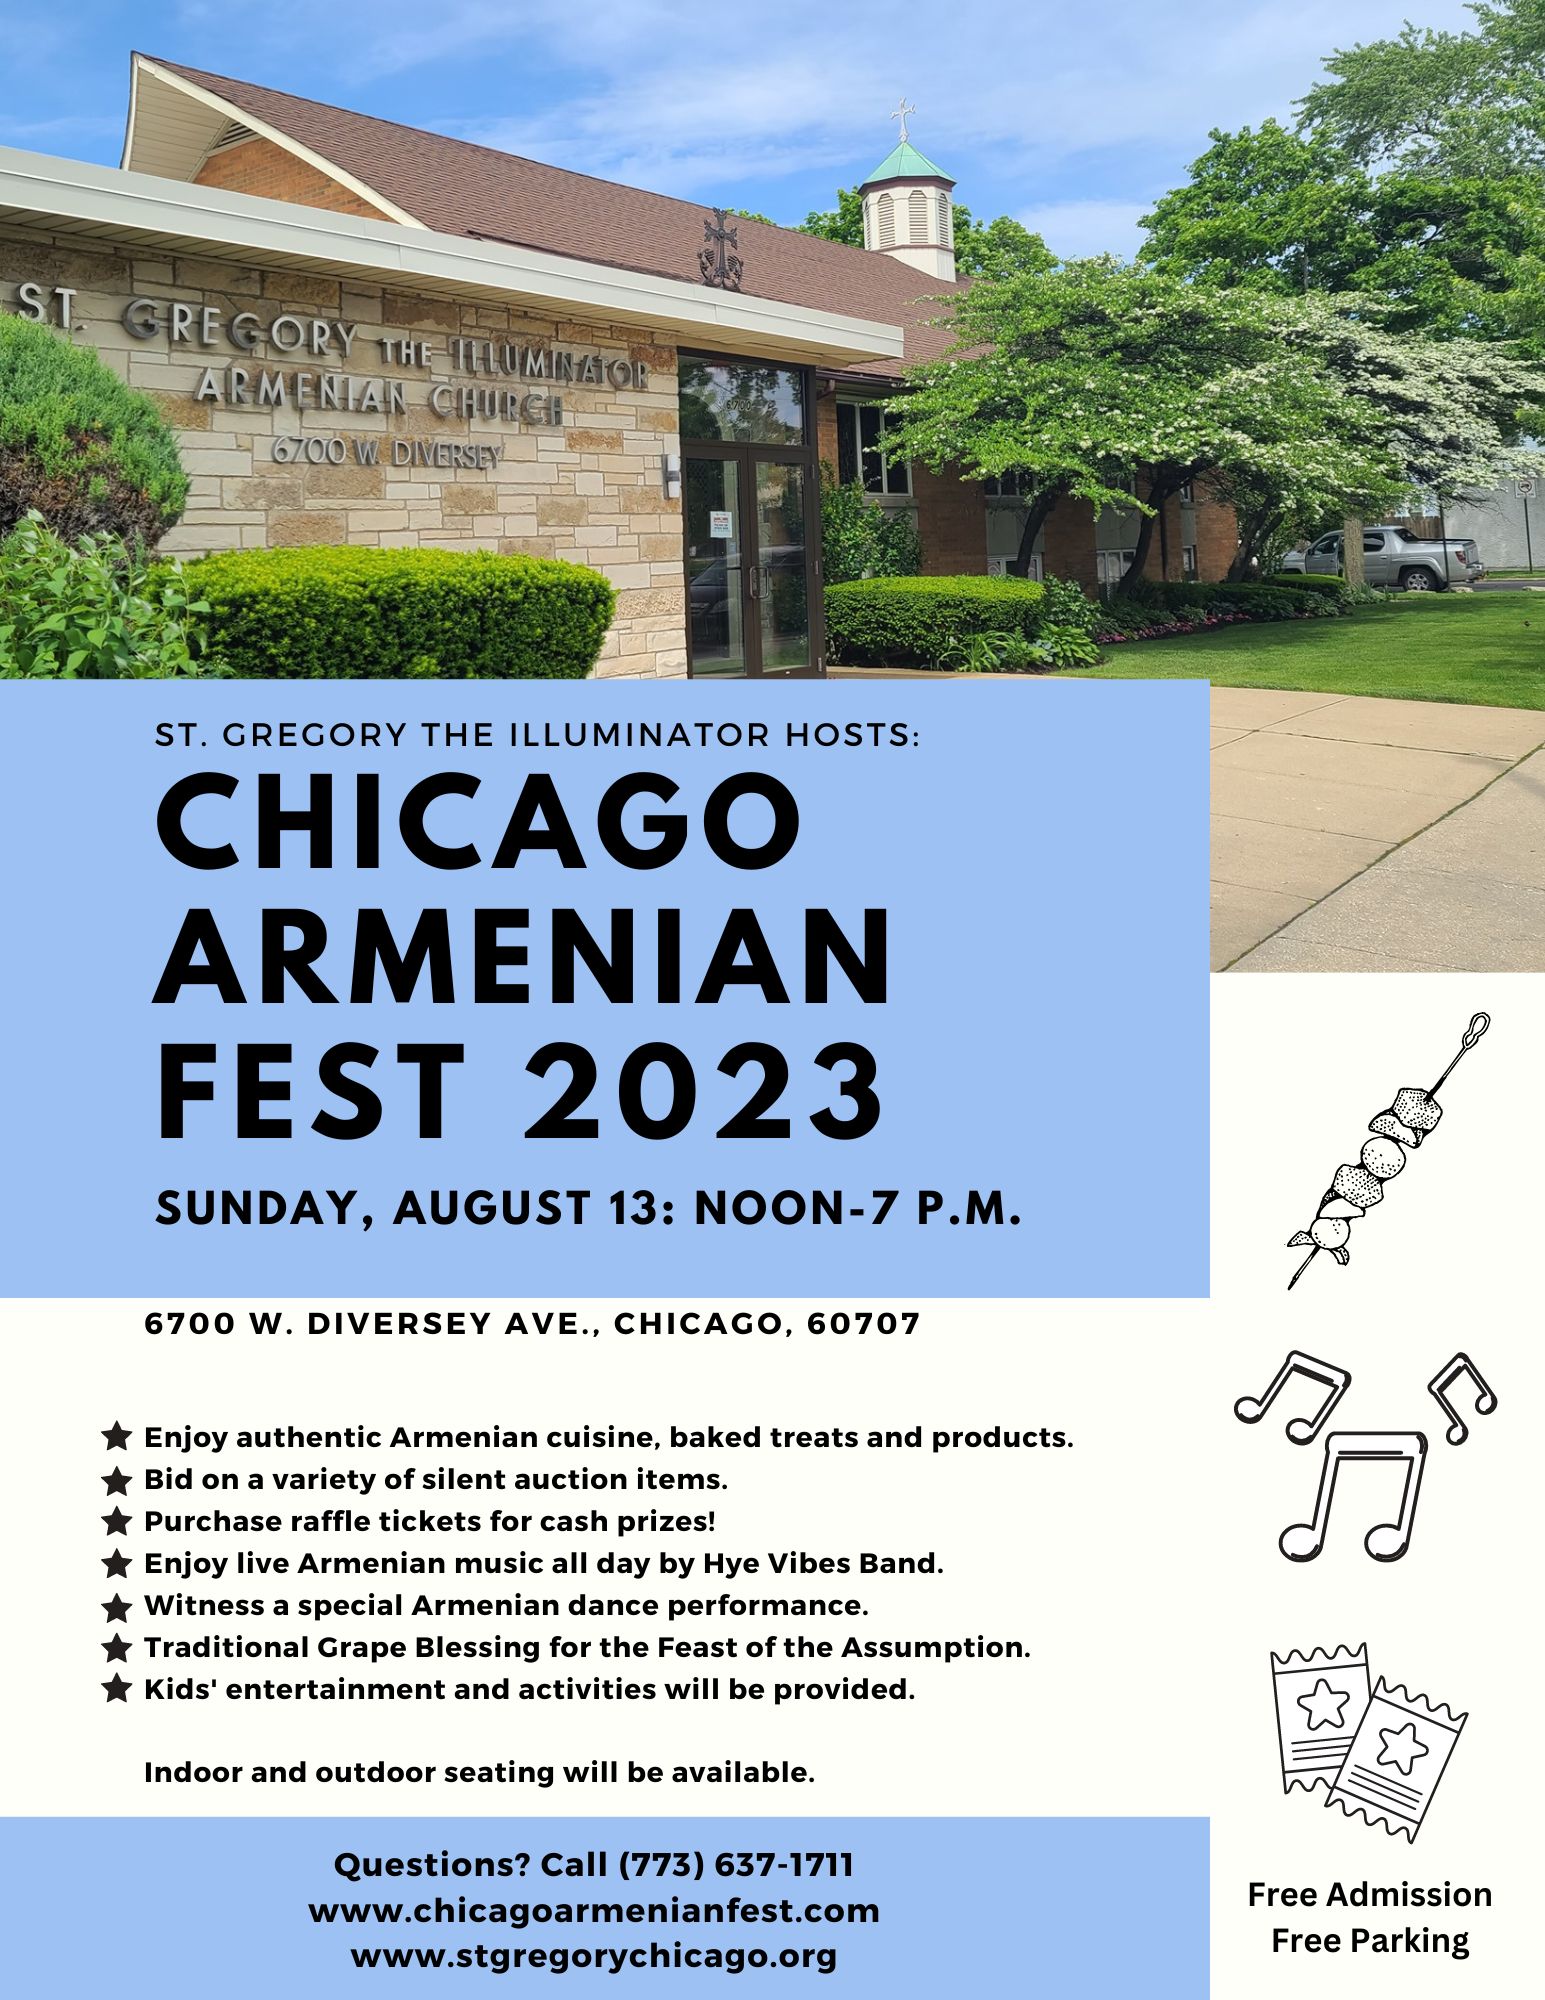 A flyer with a picture of St. Gregory the Illuminator Armenian Church of Chicago showcasing their annual Chicago Armenian Fest 2023, which will be hosted on Sunday, August 13 from 12 noon until 7 p.m.